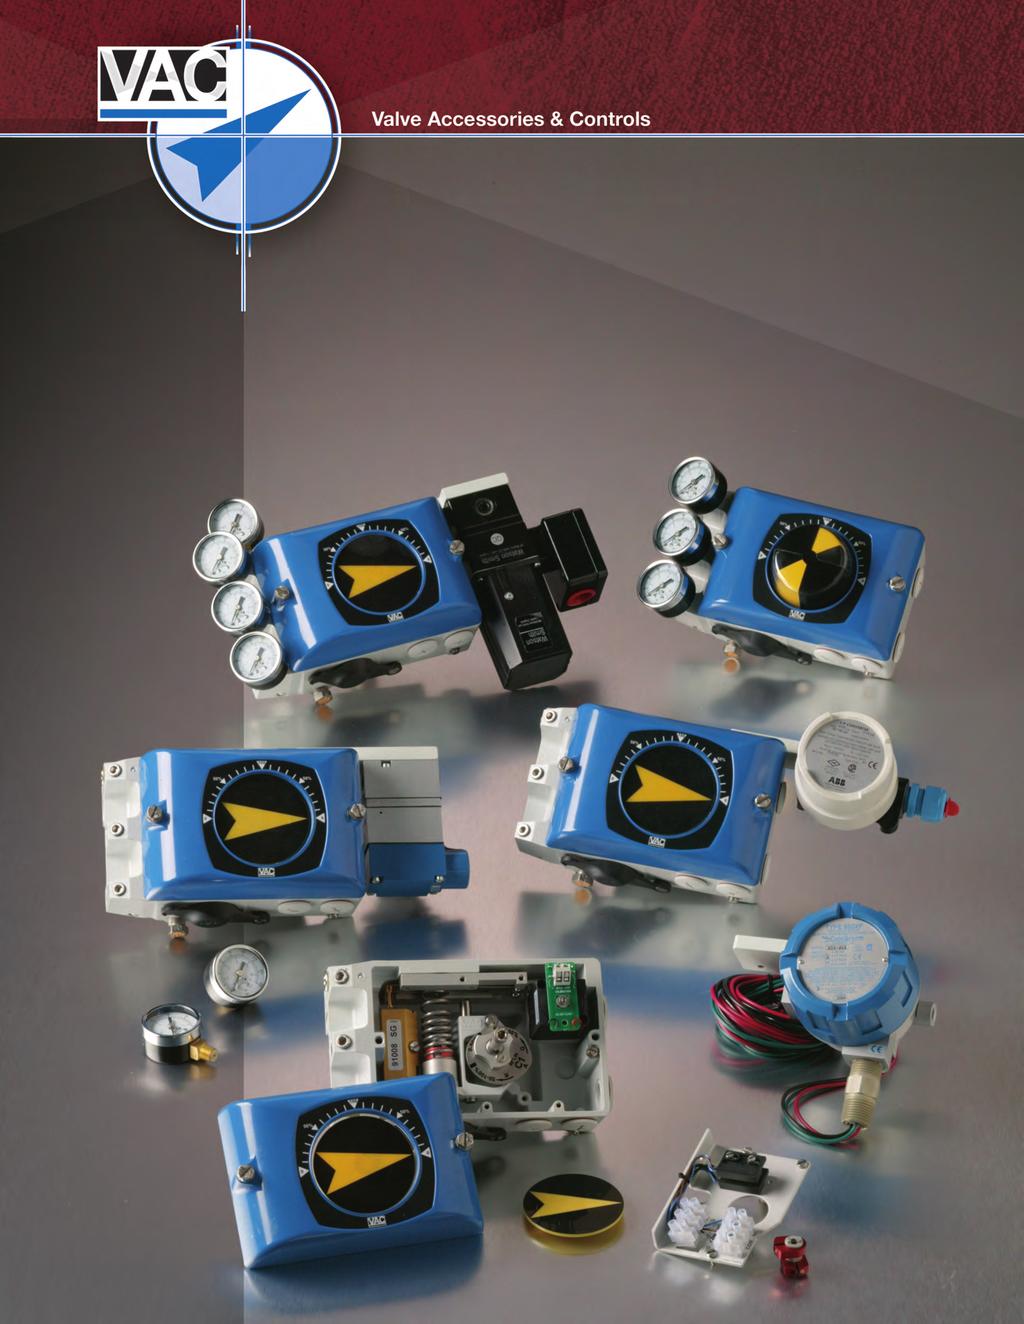 V200 Series Positioners In a single compact and rugged housing The V200 positioner incorporates the flexibility of converting from a pneumatic unit to several versions of an electropneumatic unit,